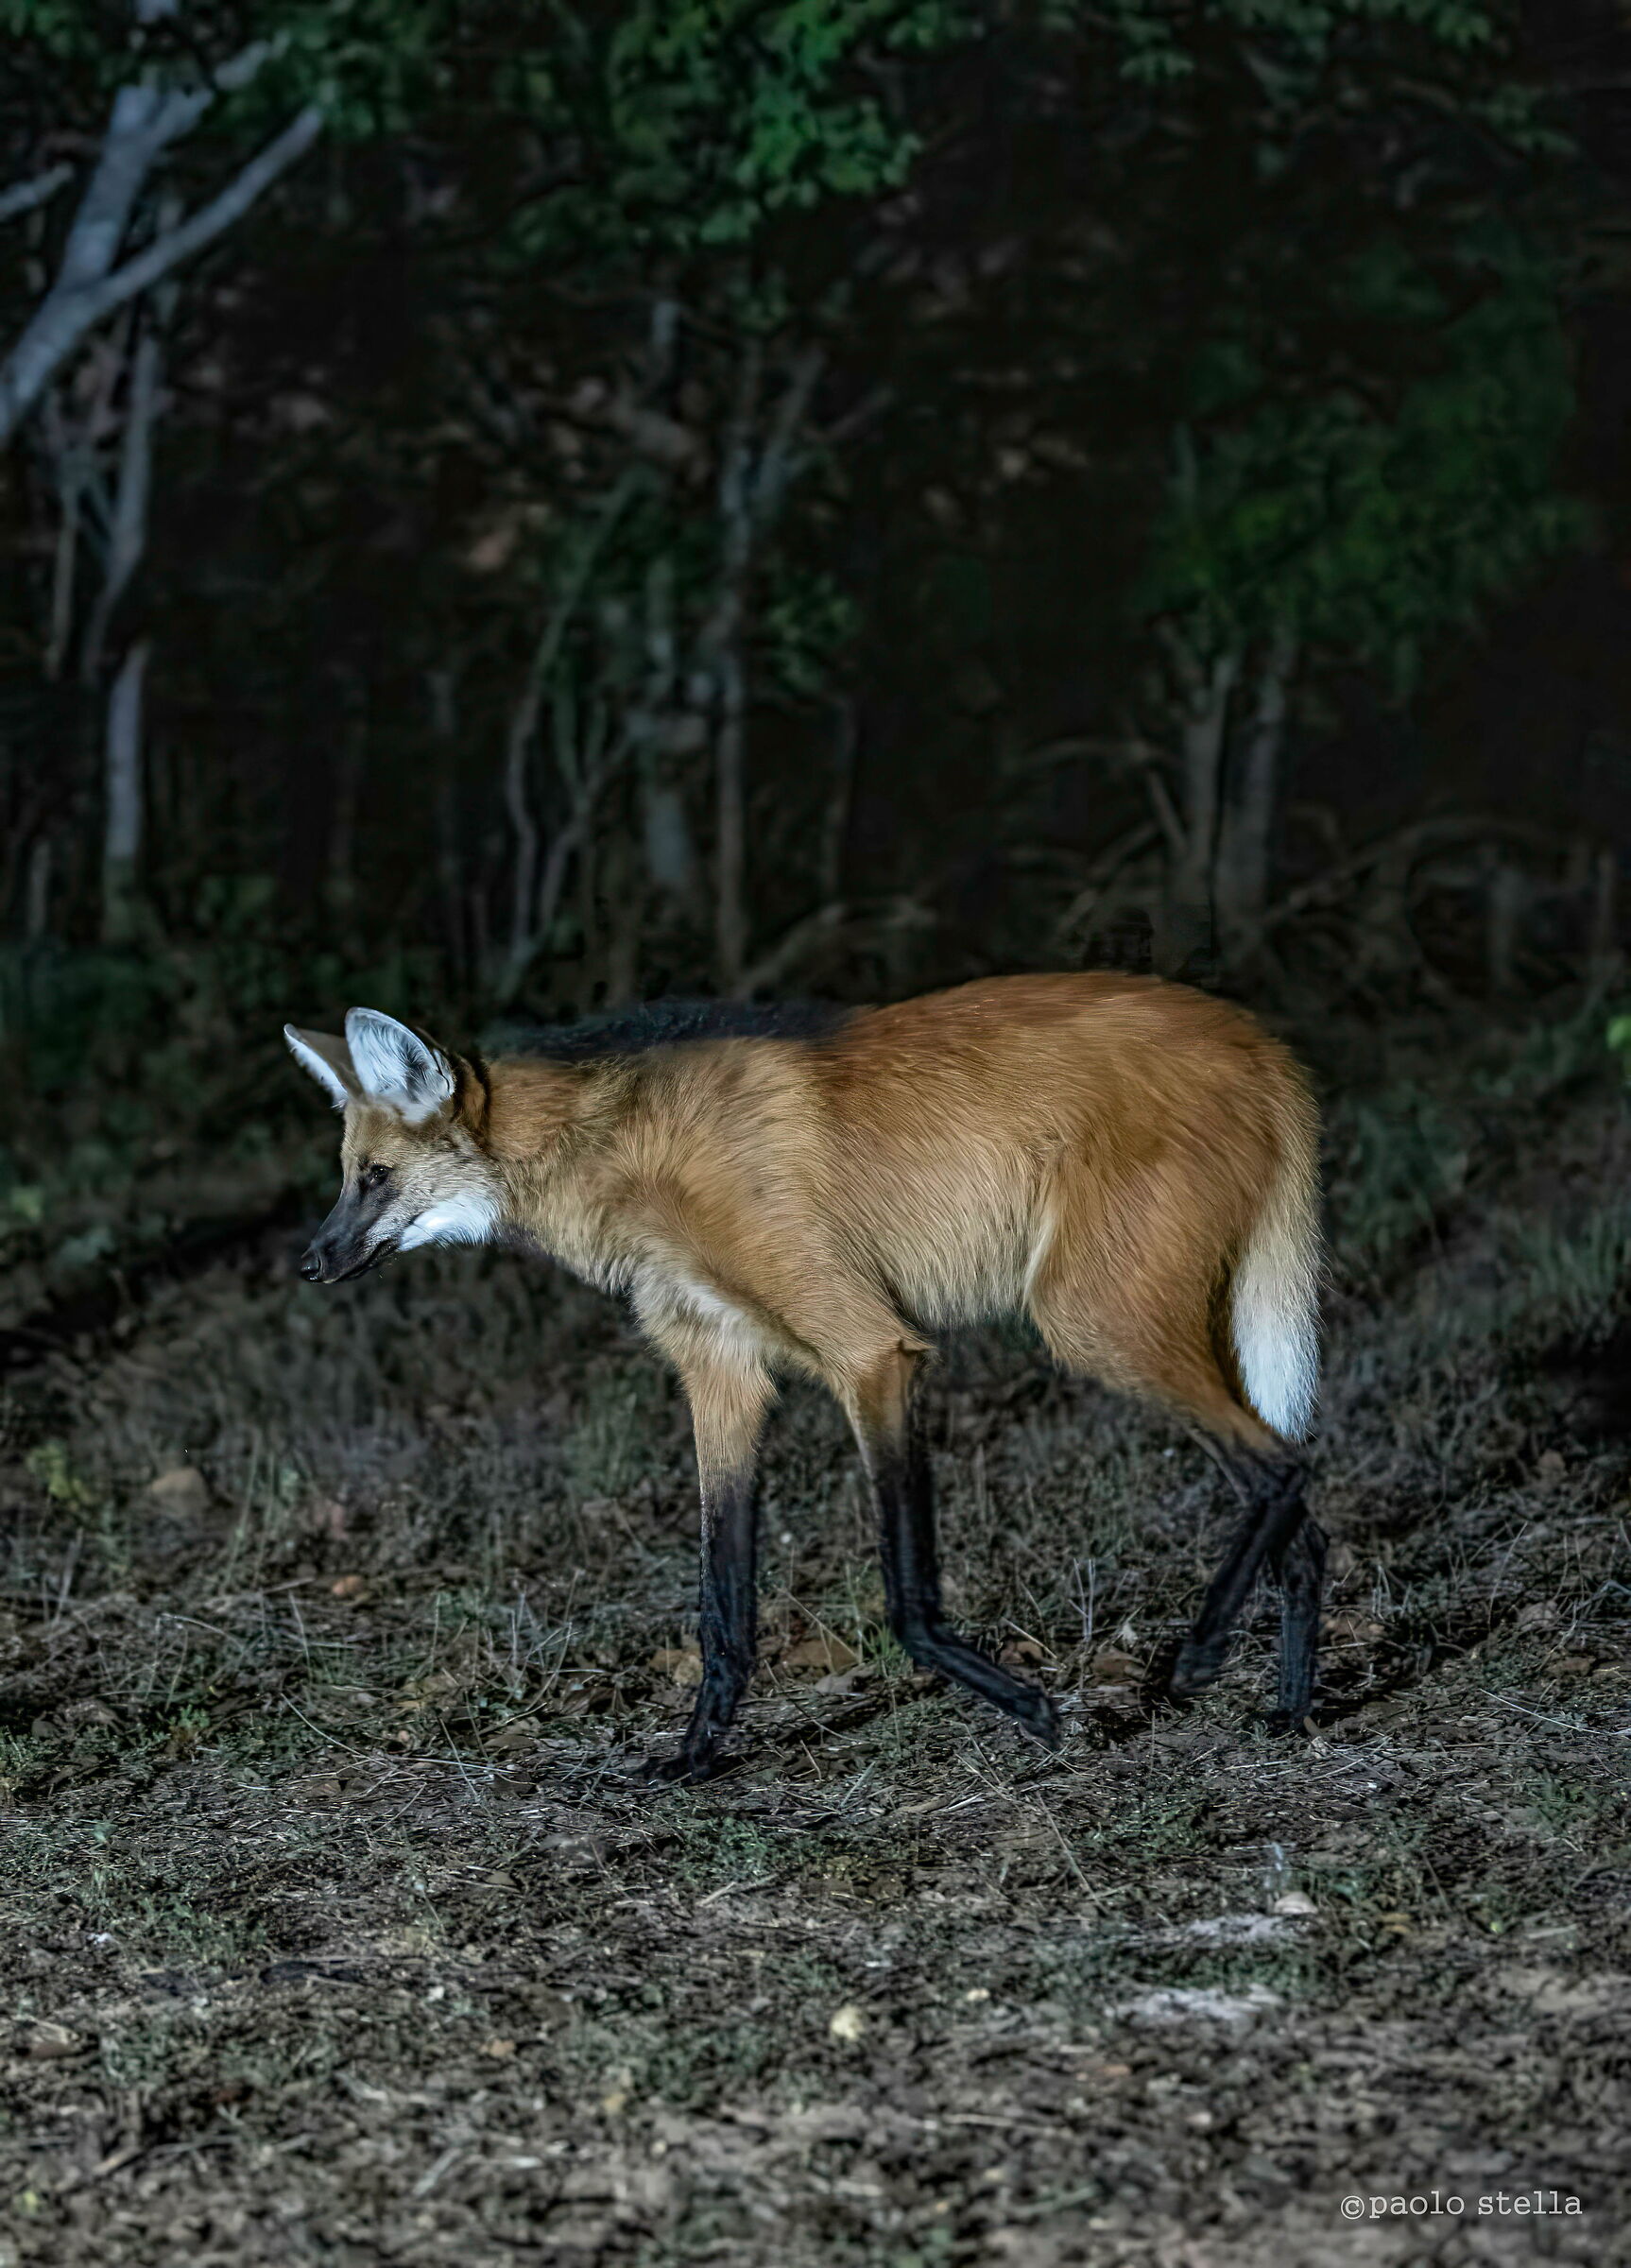 The maned wolf...